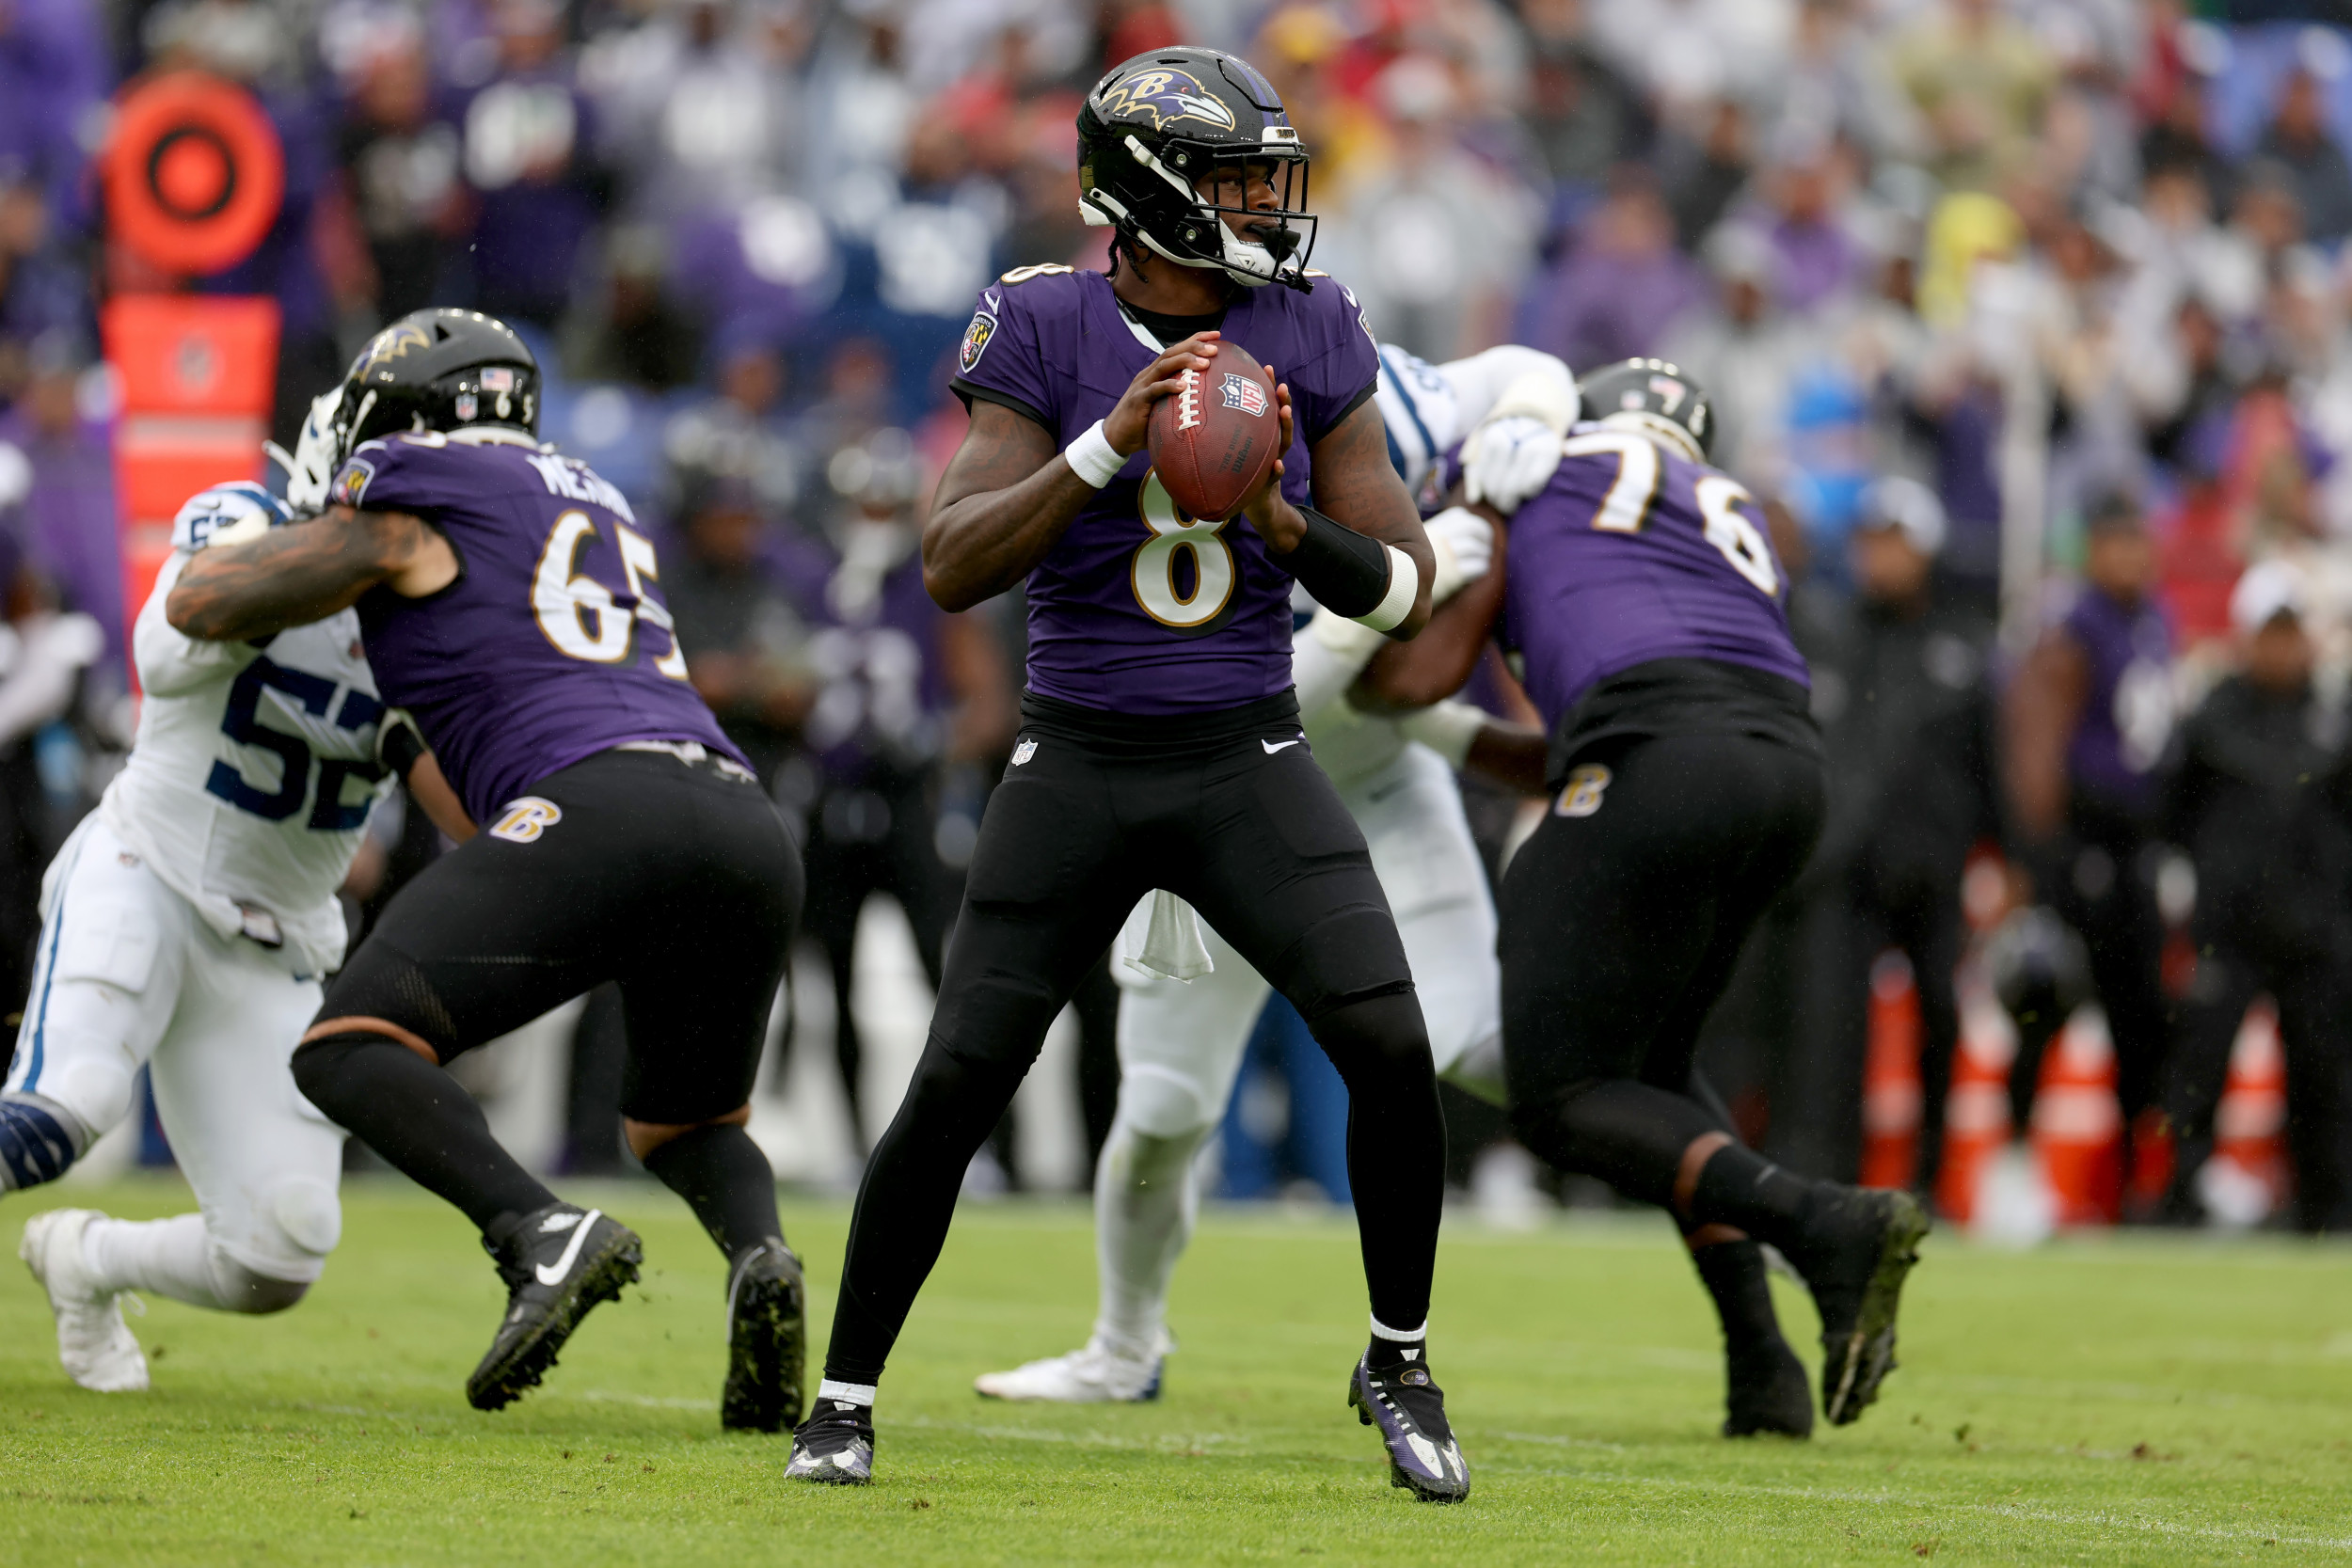 where can i watch the baltimore ravens game today